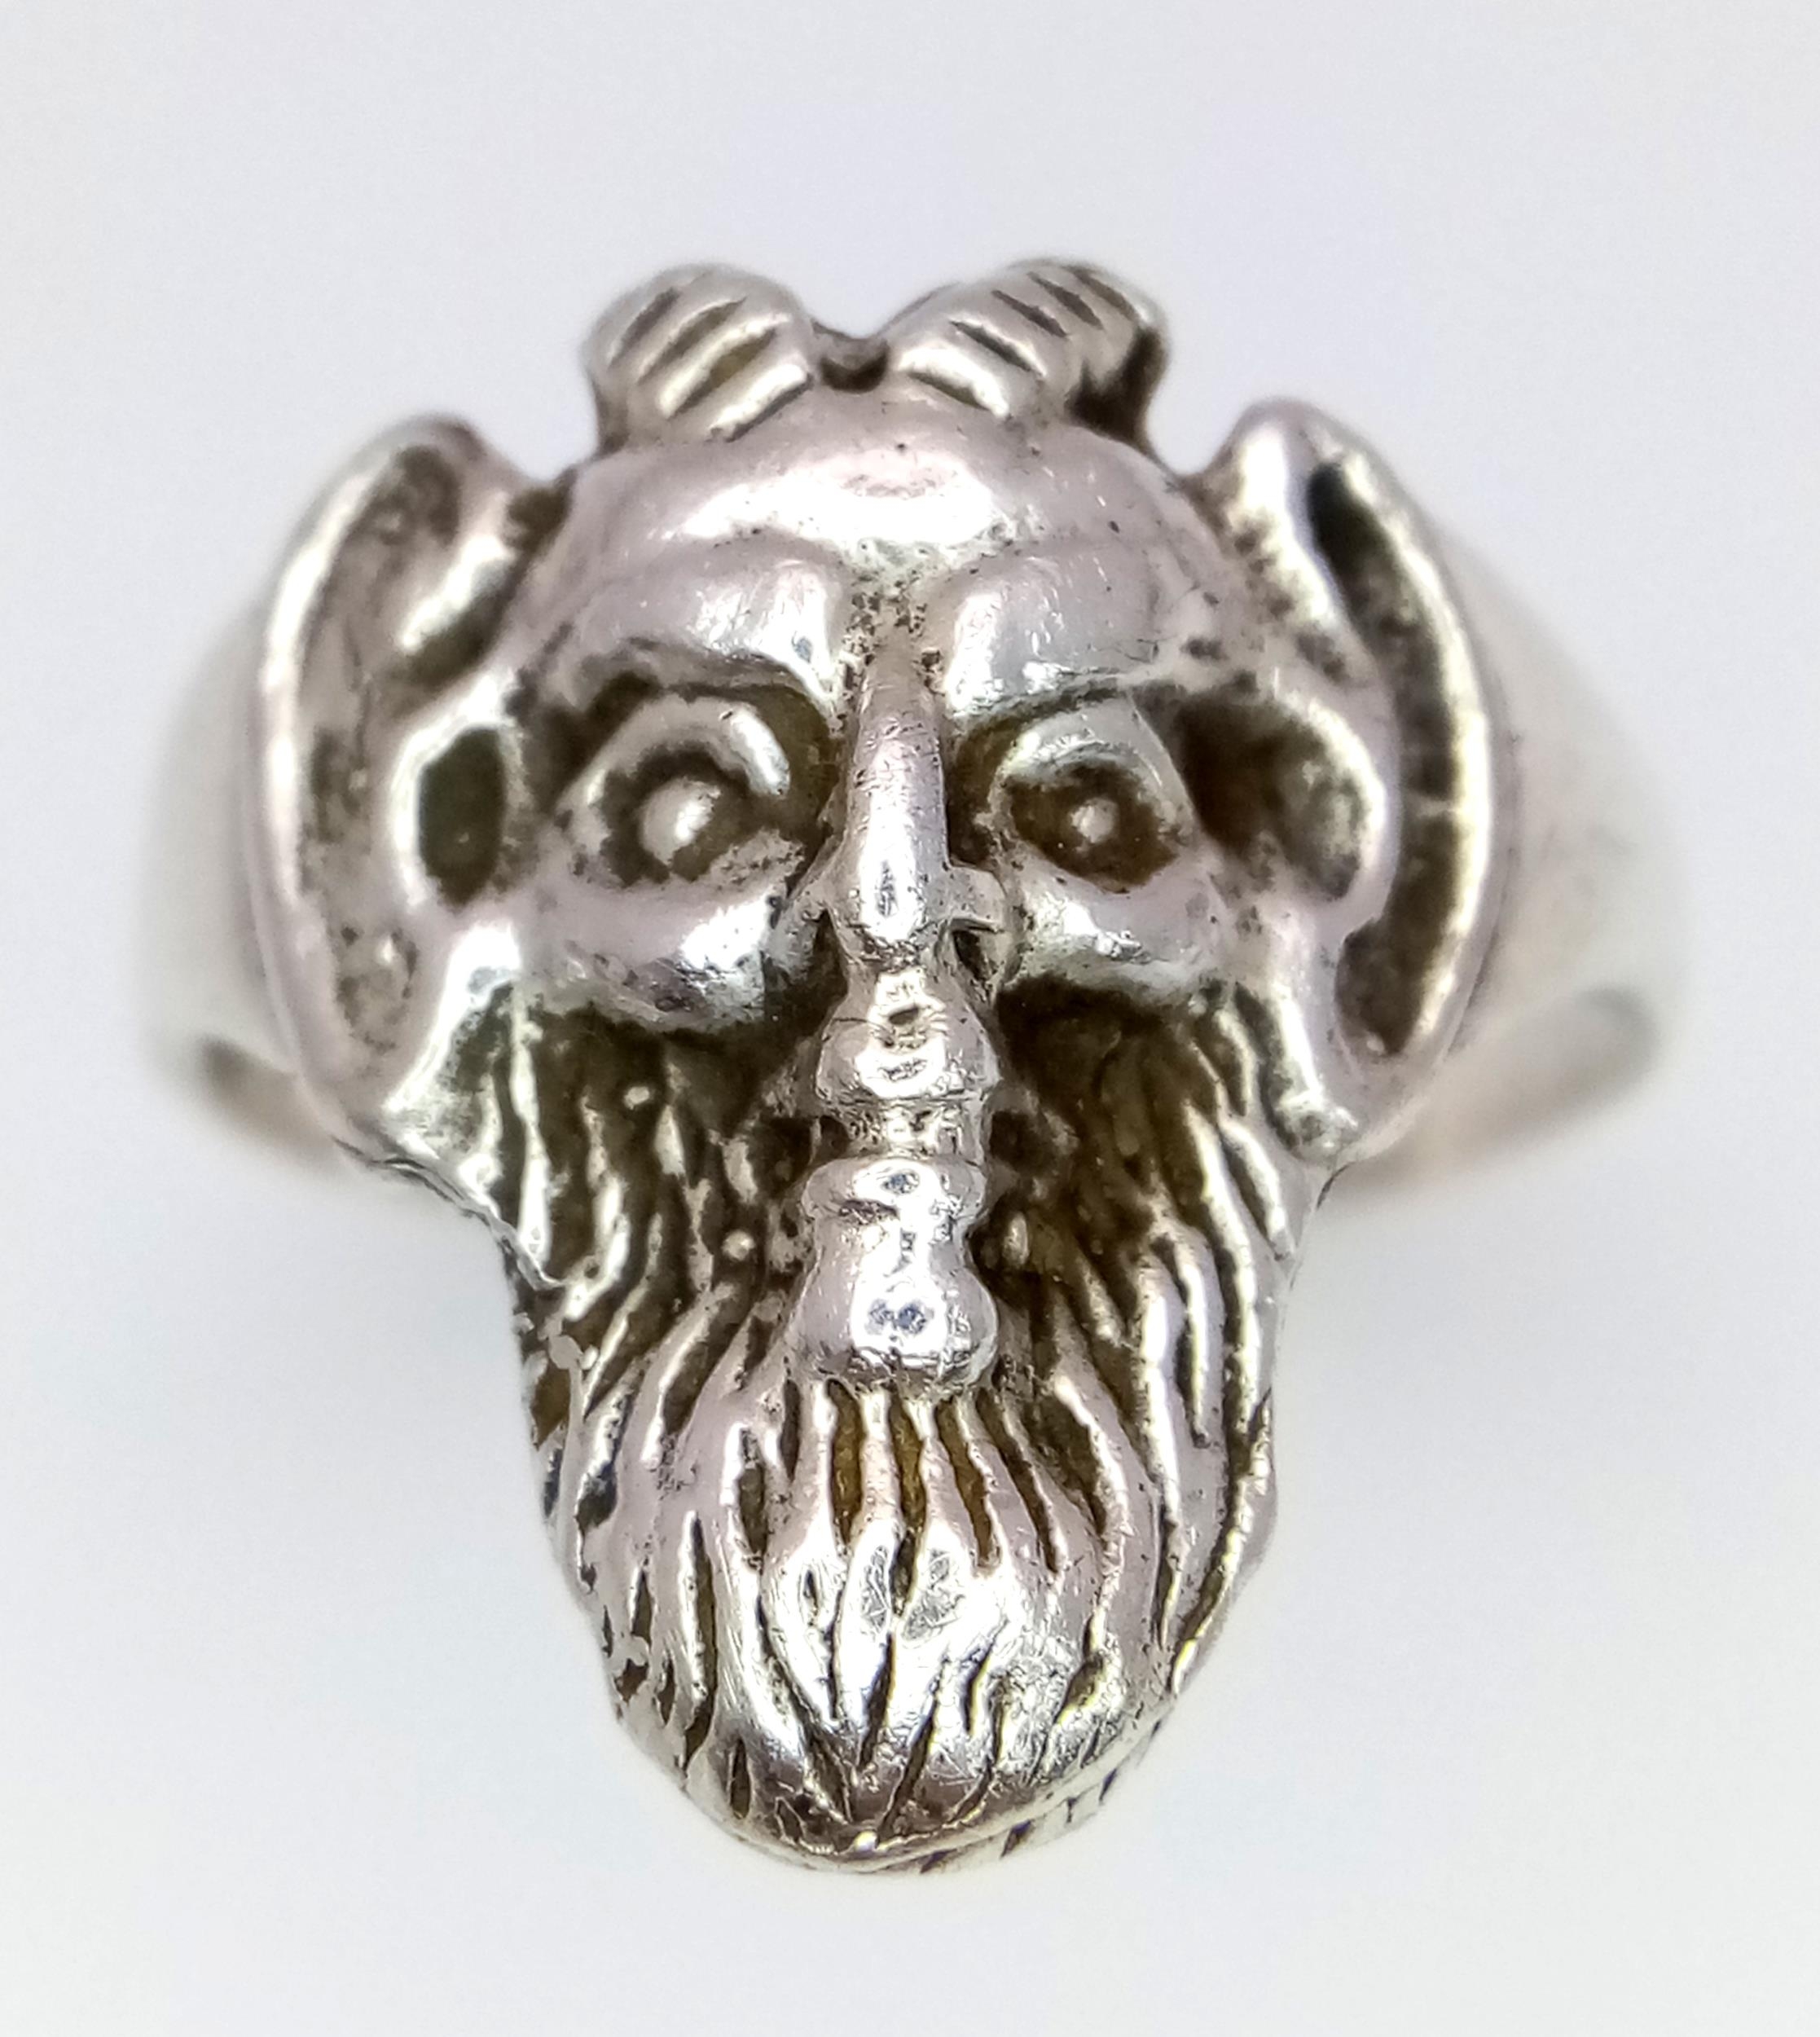 A Very Unique, Vintage or Older, Hand Crafted Grotesque Design Silver Ring Size T. Crown measures - Image 3 of 5